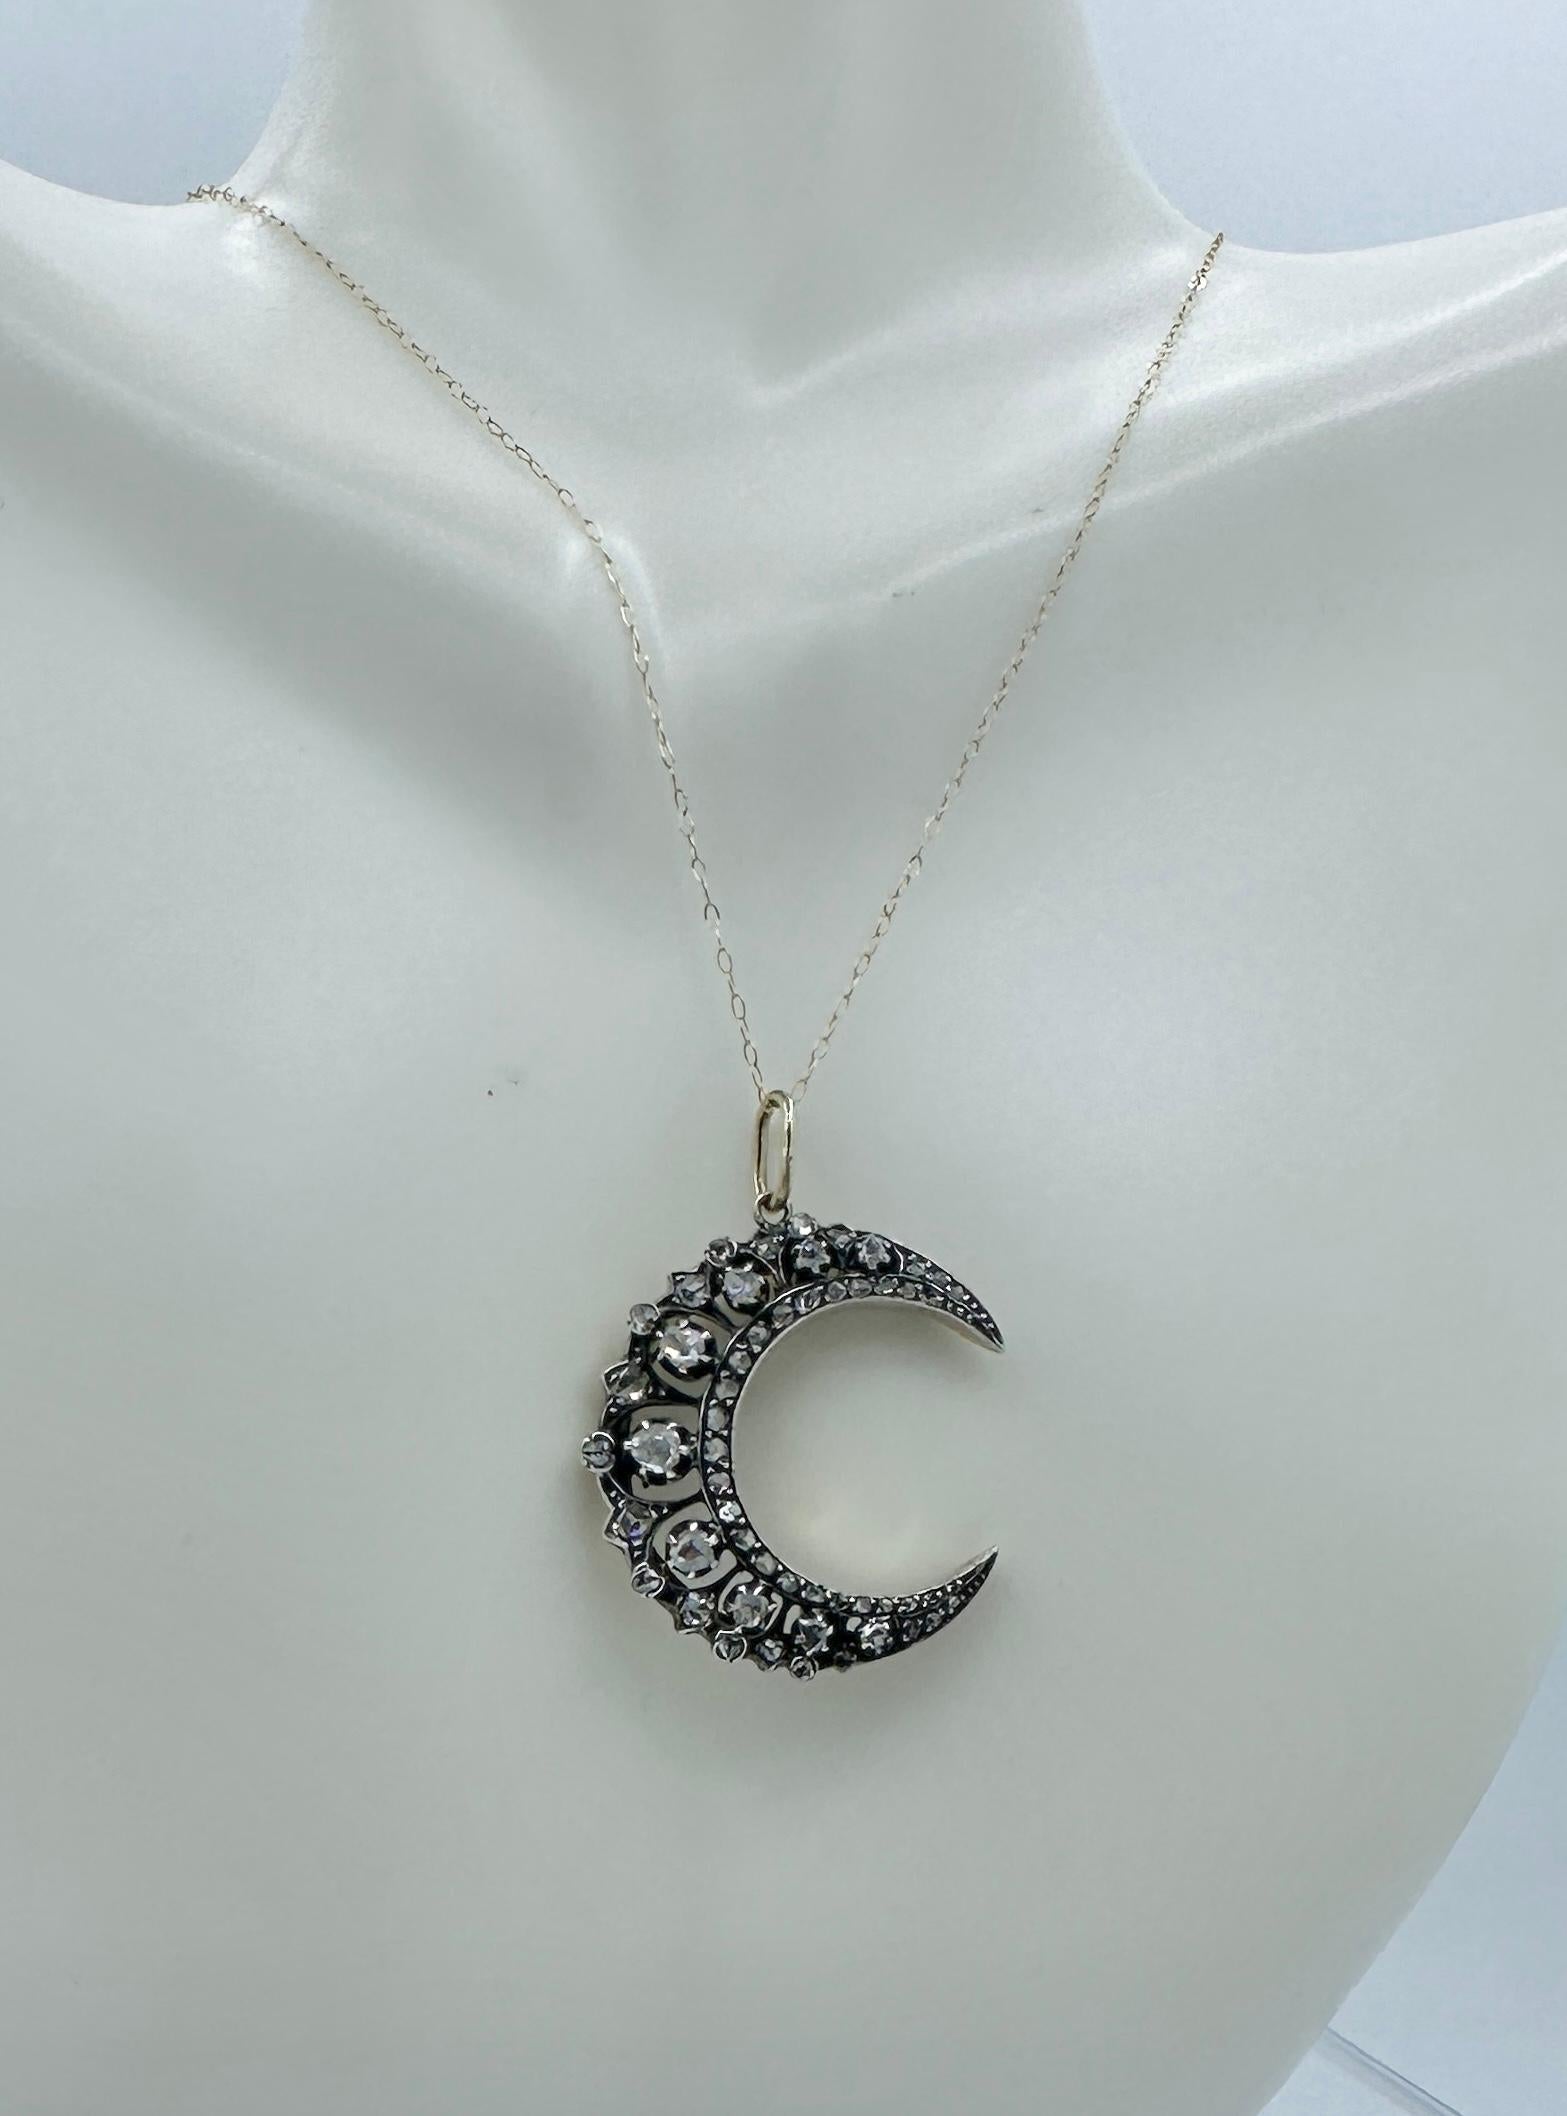 This is a gorgeous and very rare antique French Belle Epoque Rose Cut Diamond Crescent Moon Pendant in Platinum atop 18 Karat Gold.  The magnificent jewel has nine vivid sparkling antique Rose Cut Diamonds through the center that are graduated from